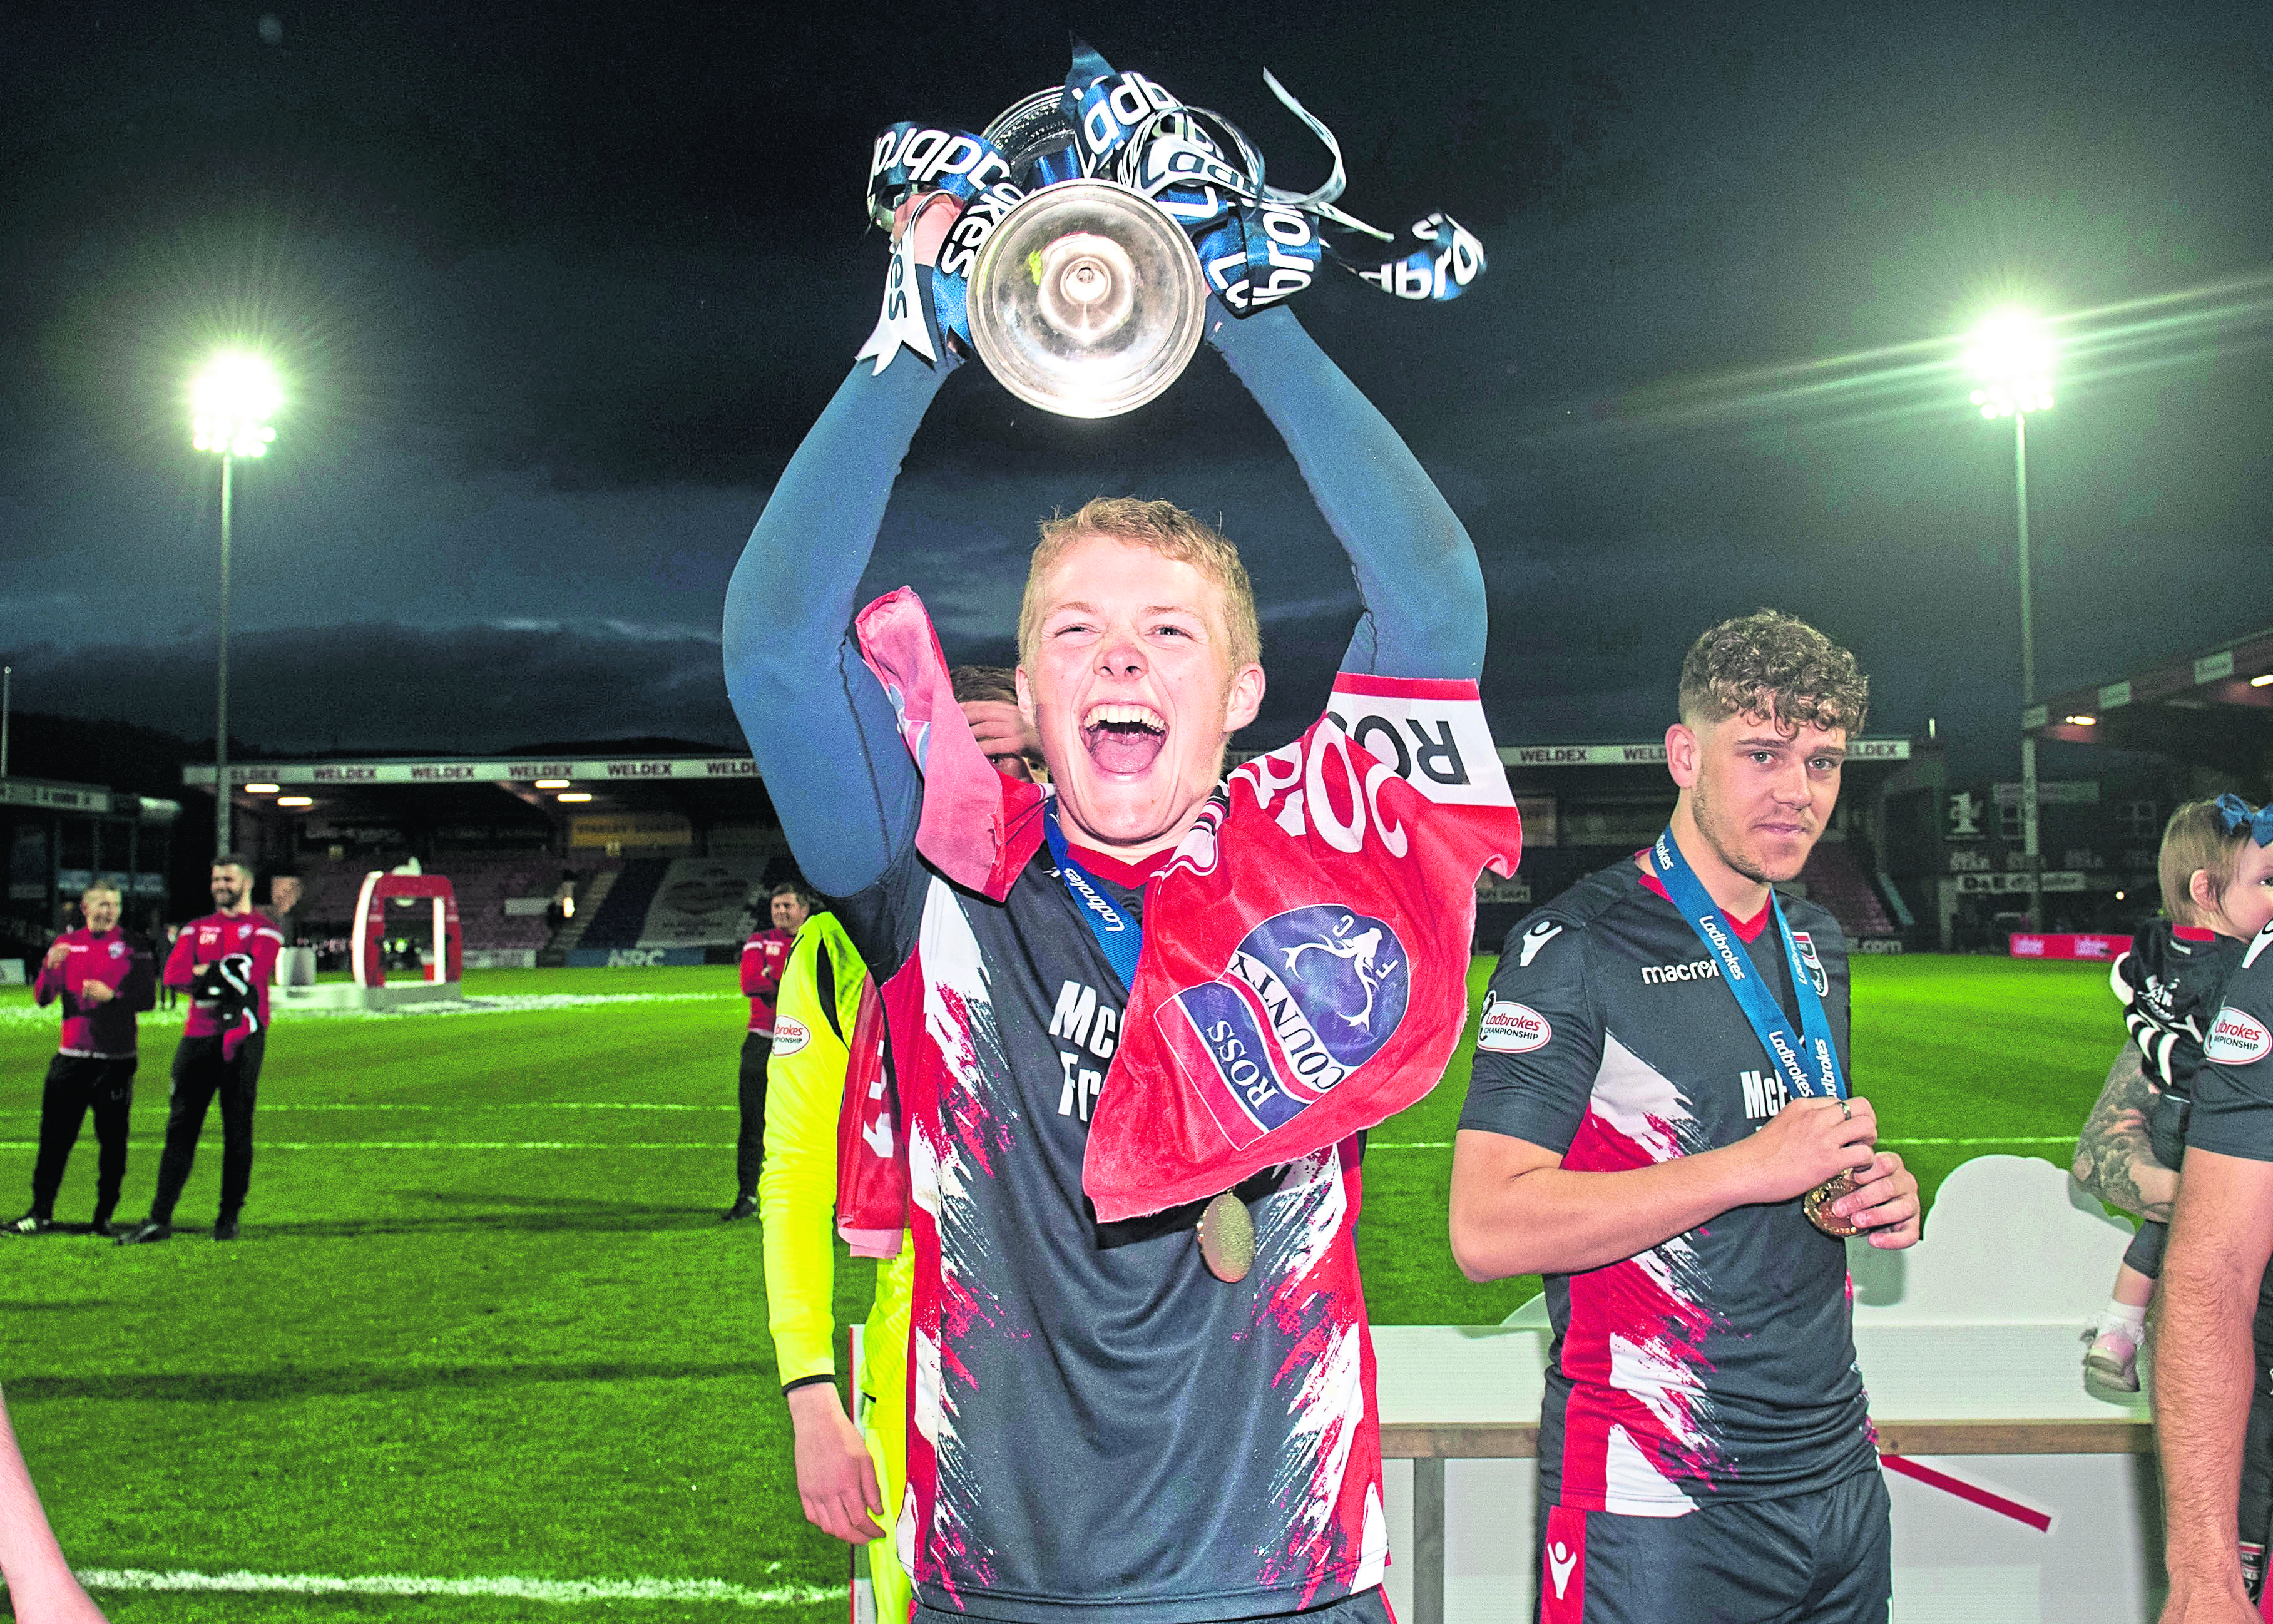 Ross Countys Tom Grivosti holds aloft the Ladbrokes Championship trophy.